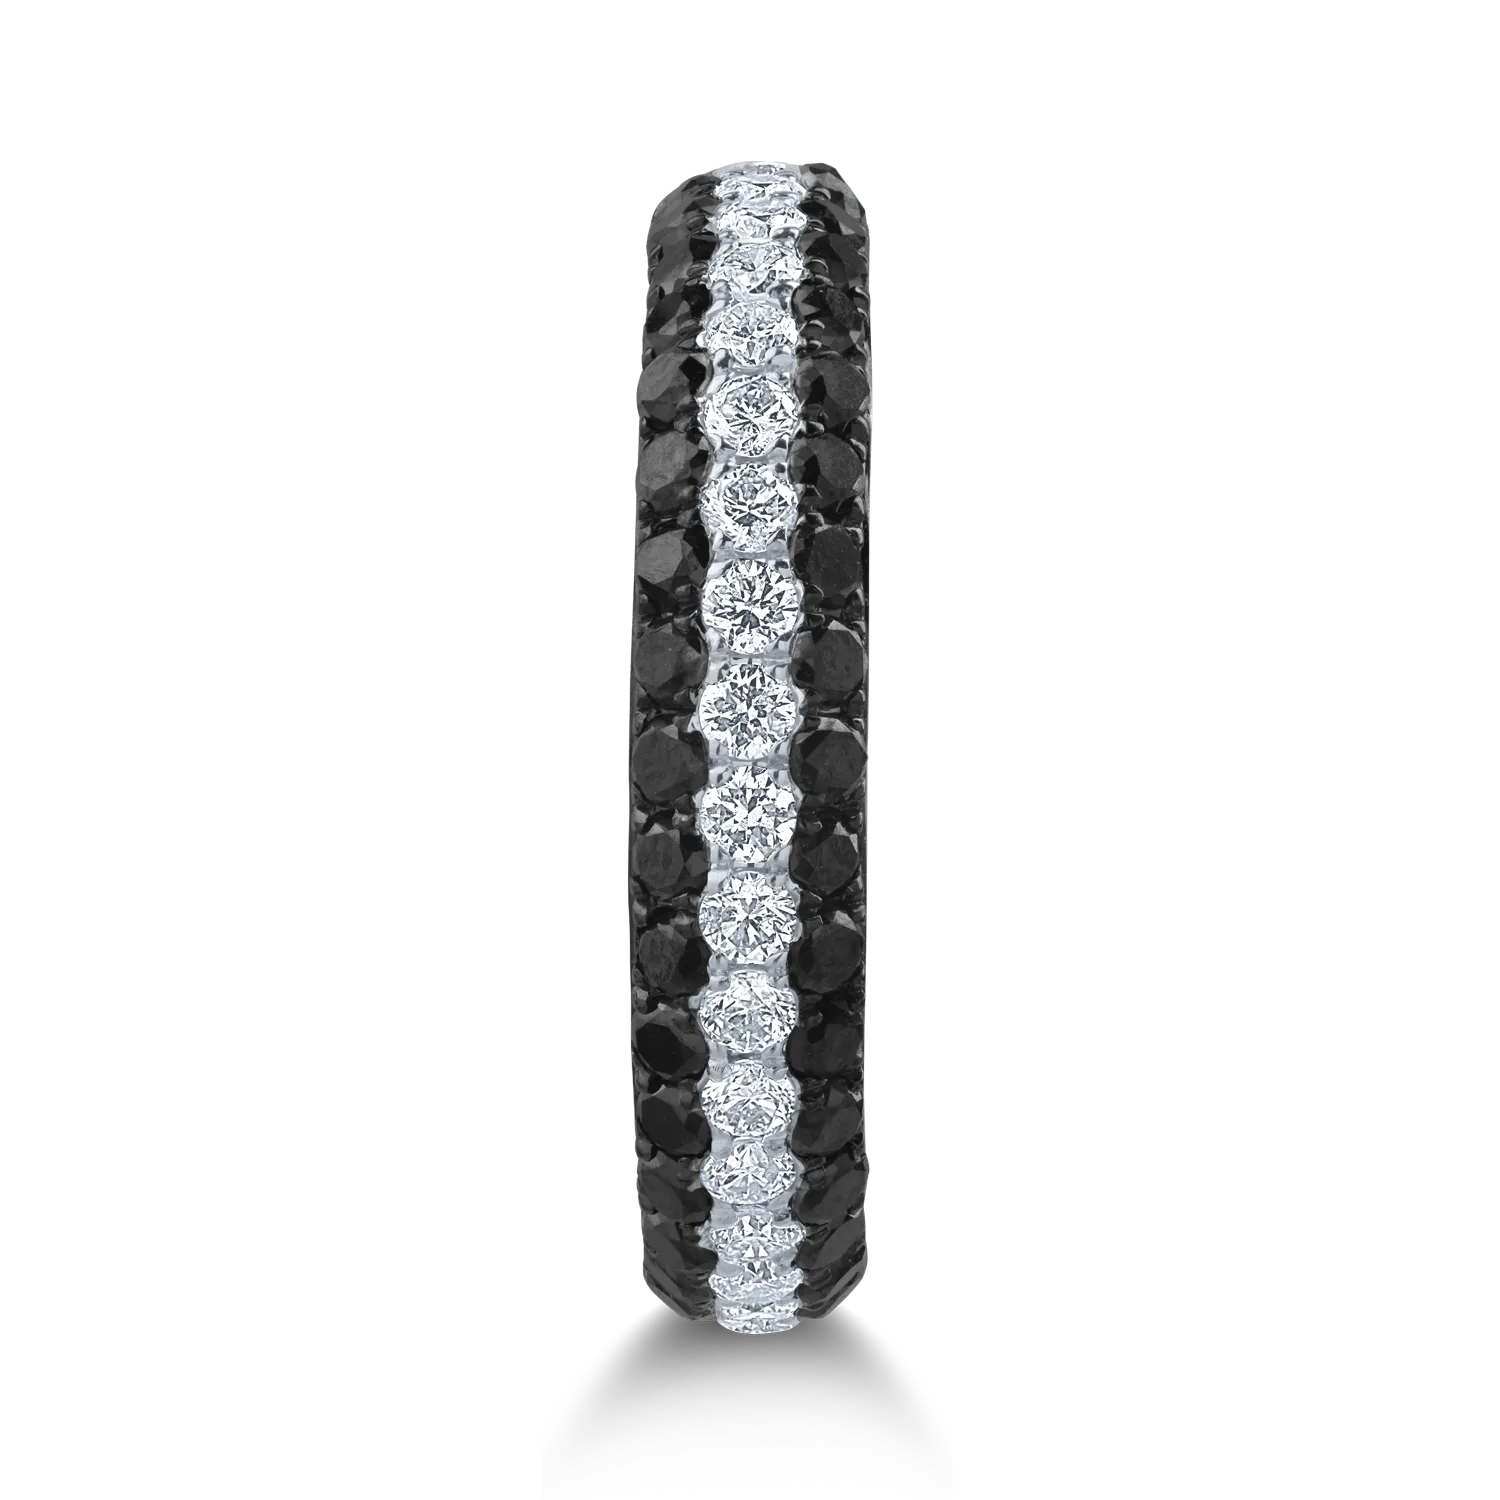 Half eternity ring in white gold with 0.66ct black diamonds and 0.31ct clear diamonds